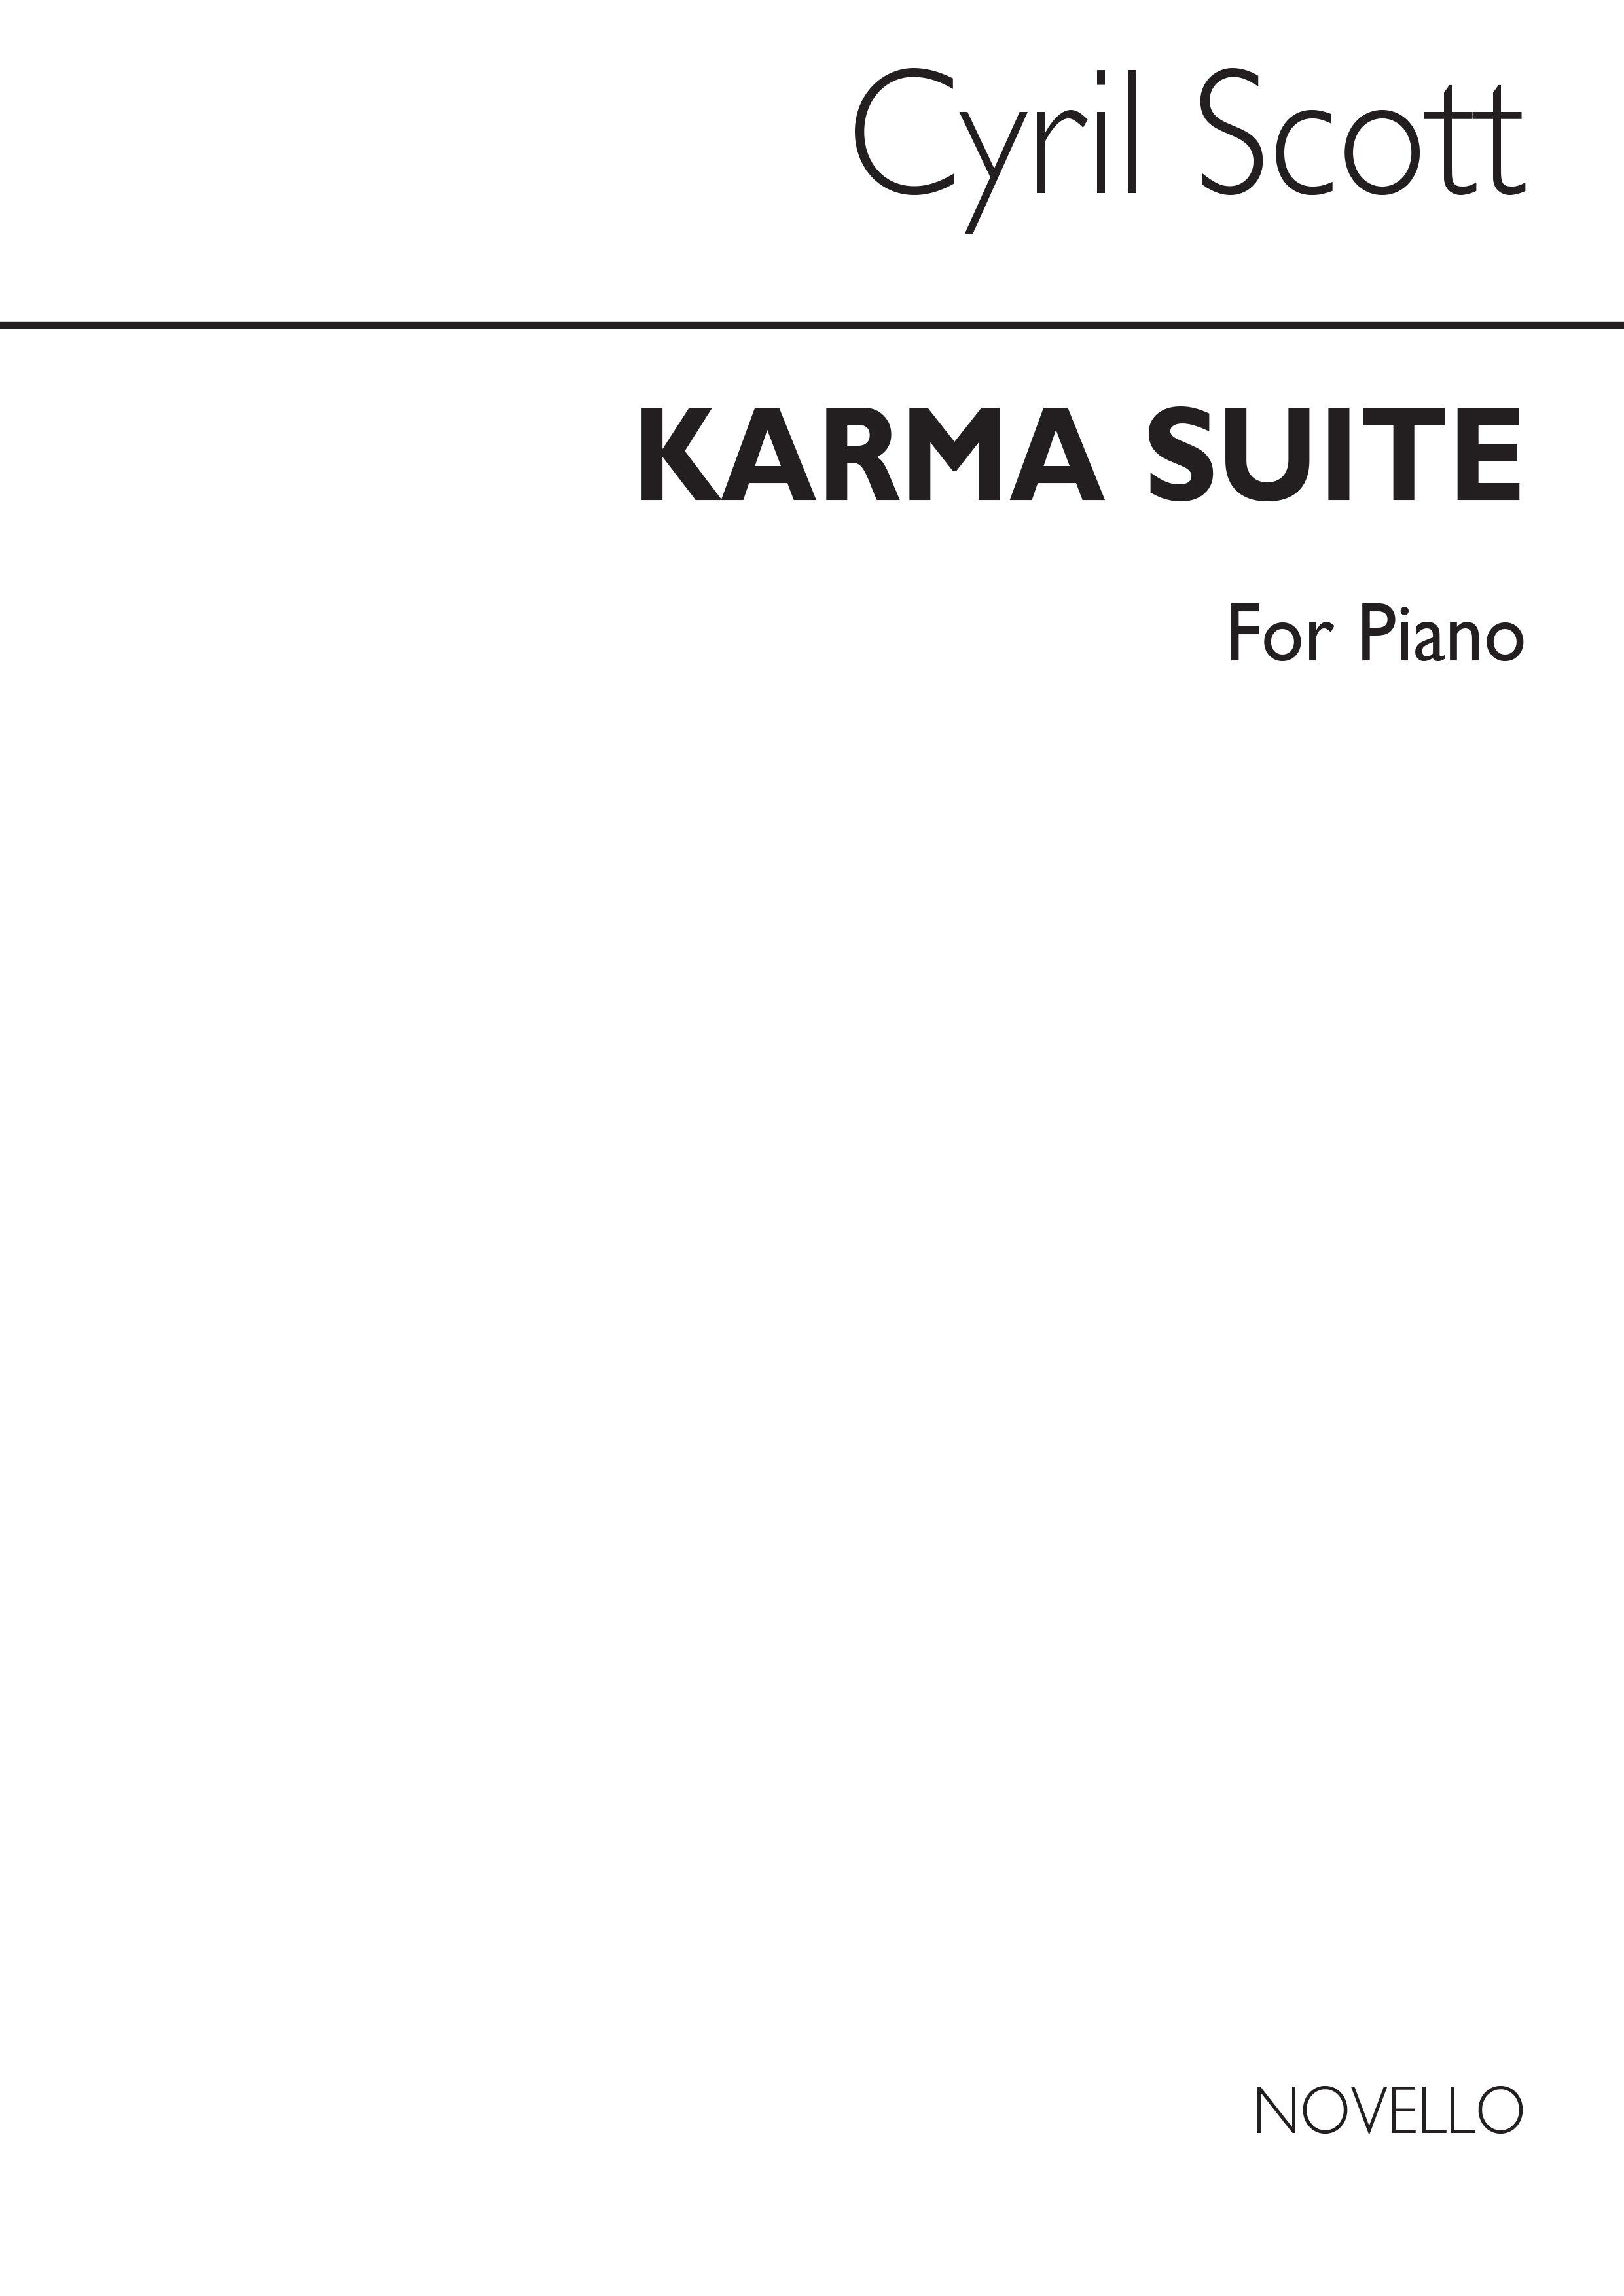 Cyril Scott: Karma Suite for Piano